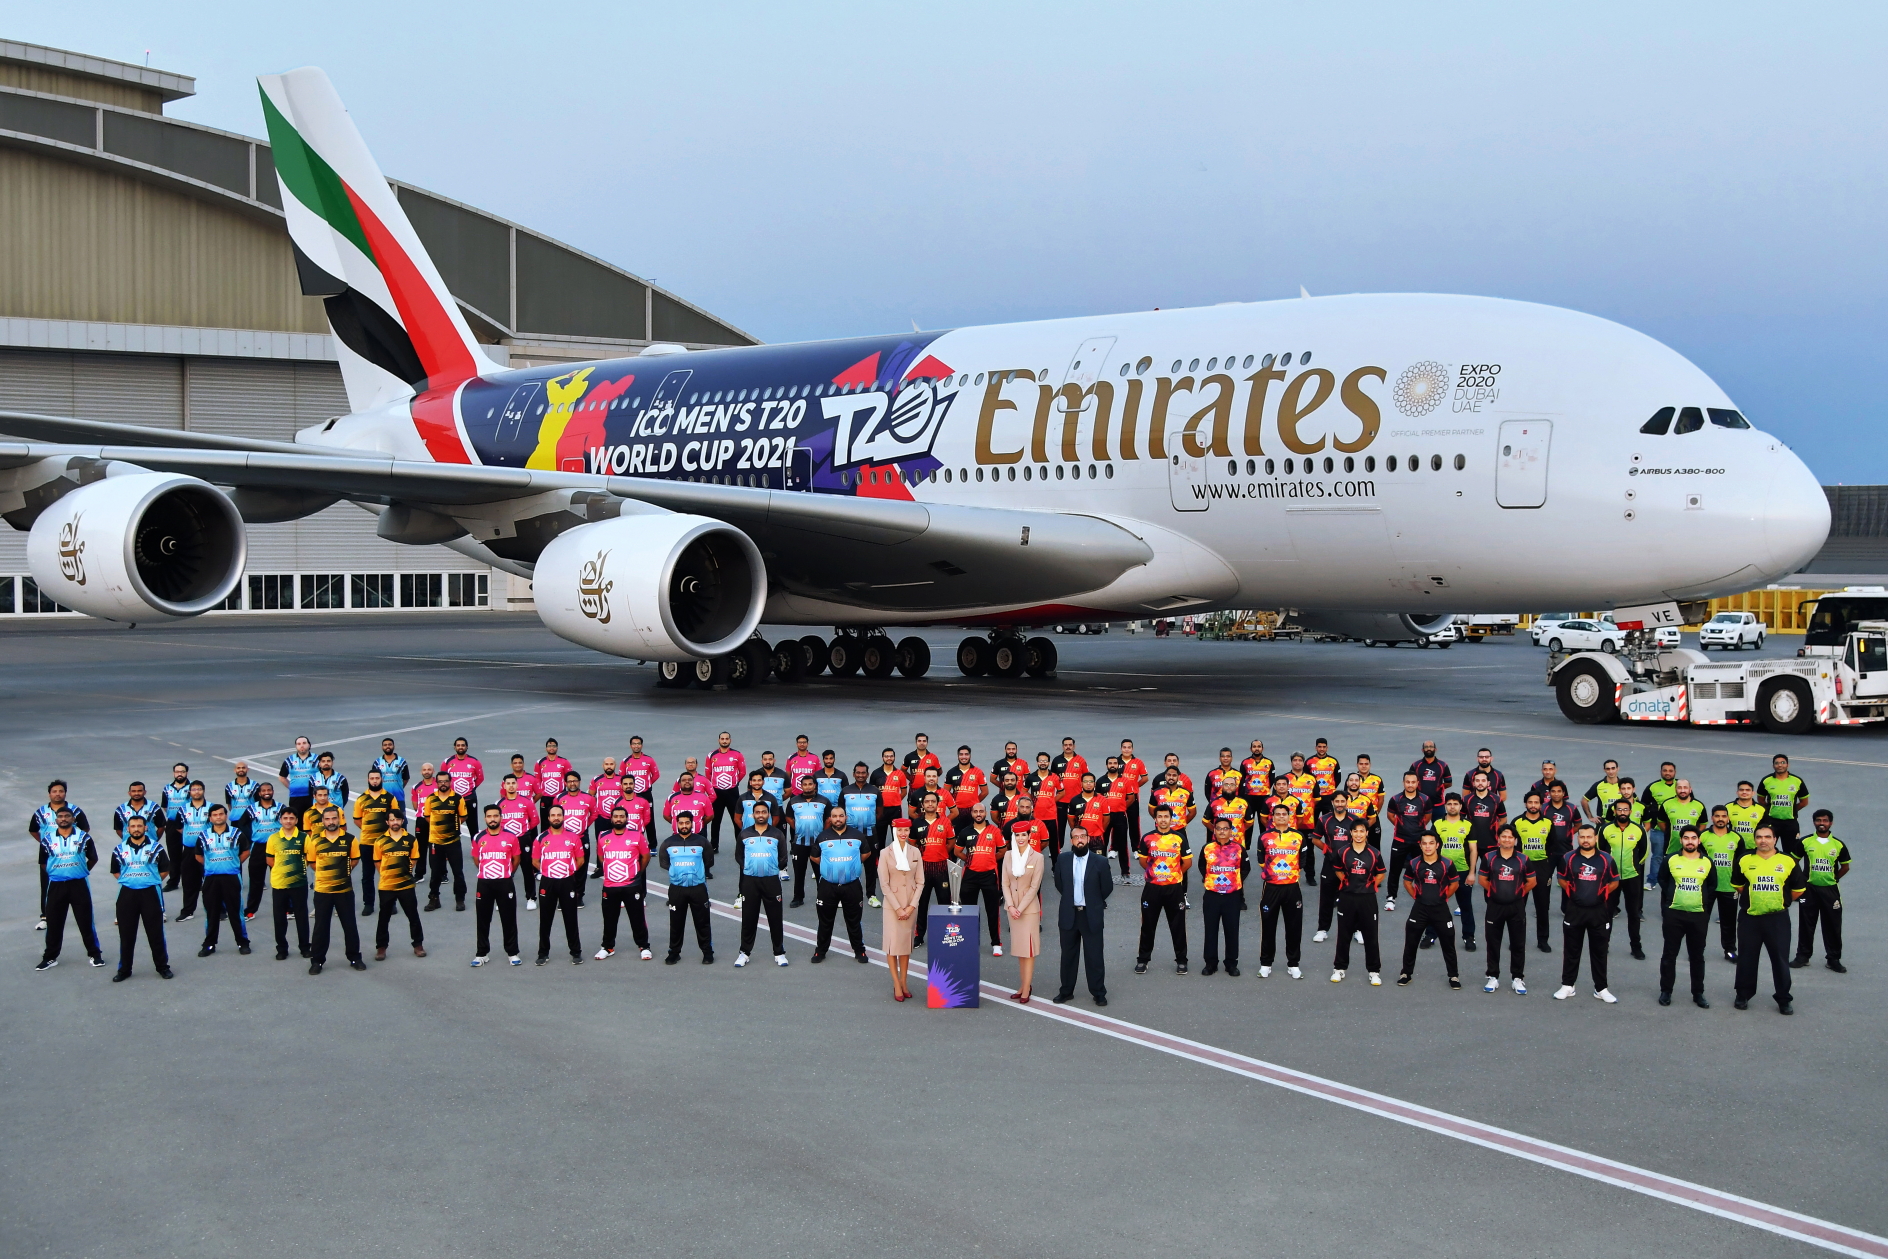 Emirates has painted an Airbus A380 in a special livery to celebrate and promote the ICC Men’s T20 World Cup, which is currently taking place for the first time in the UAE and Oman from 17 October to 14 November 2021.  Click to enlarge.